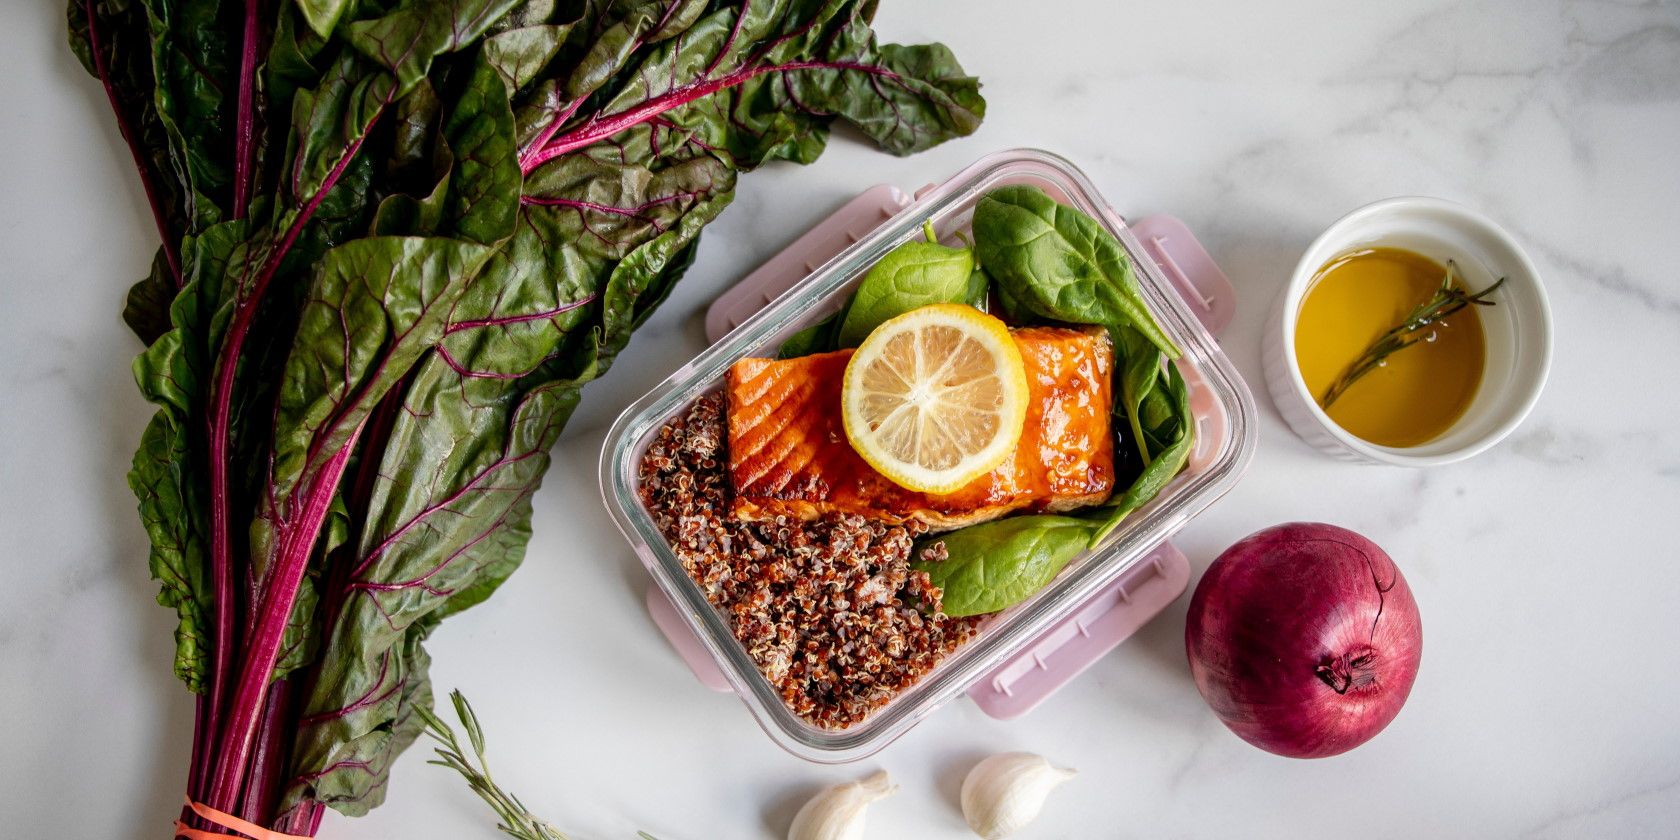 Salmon rice meal packed in lunchbox on tabletop